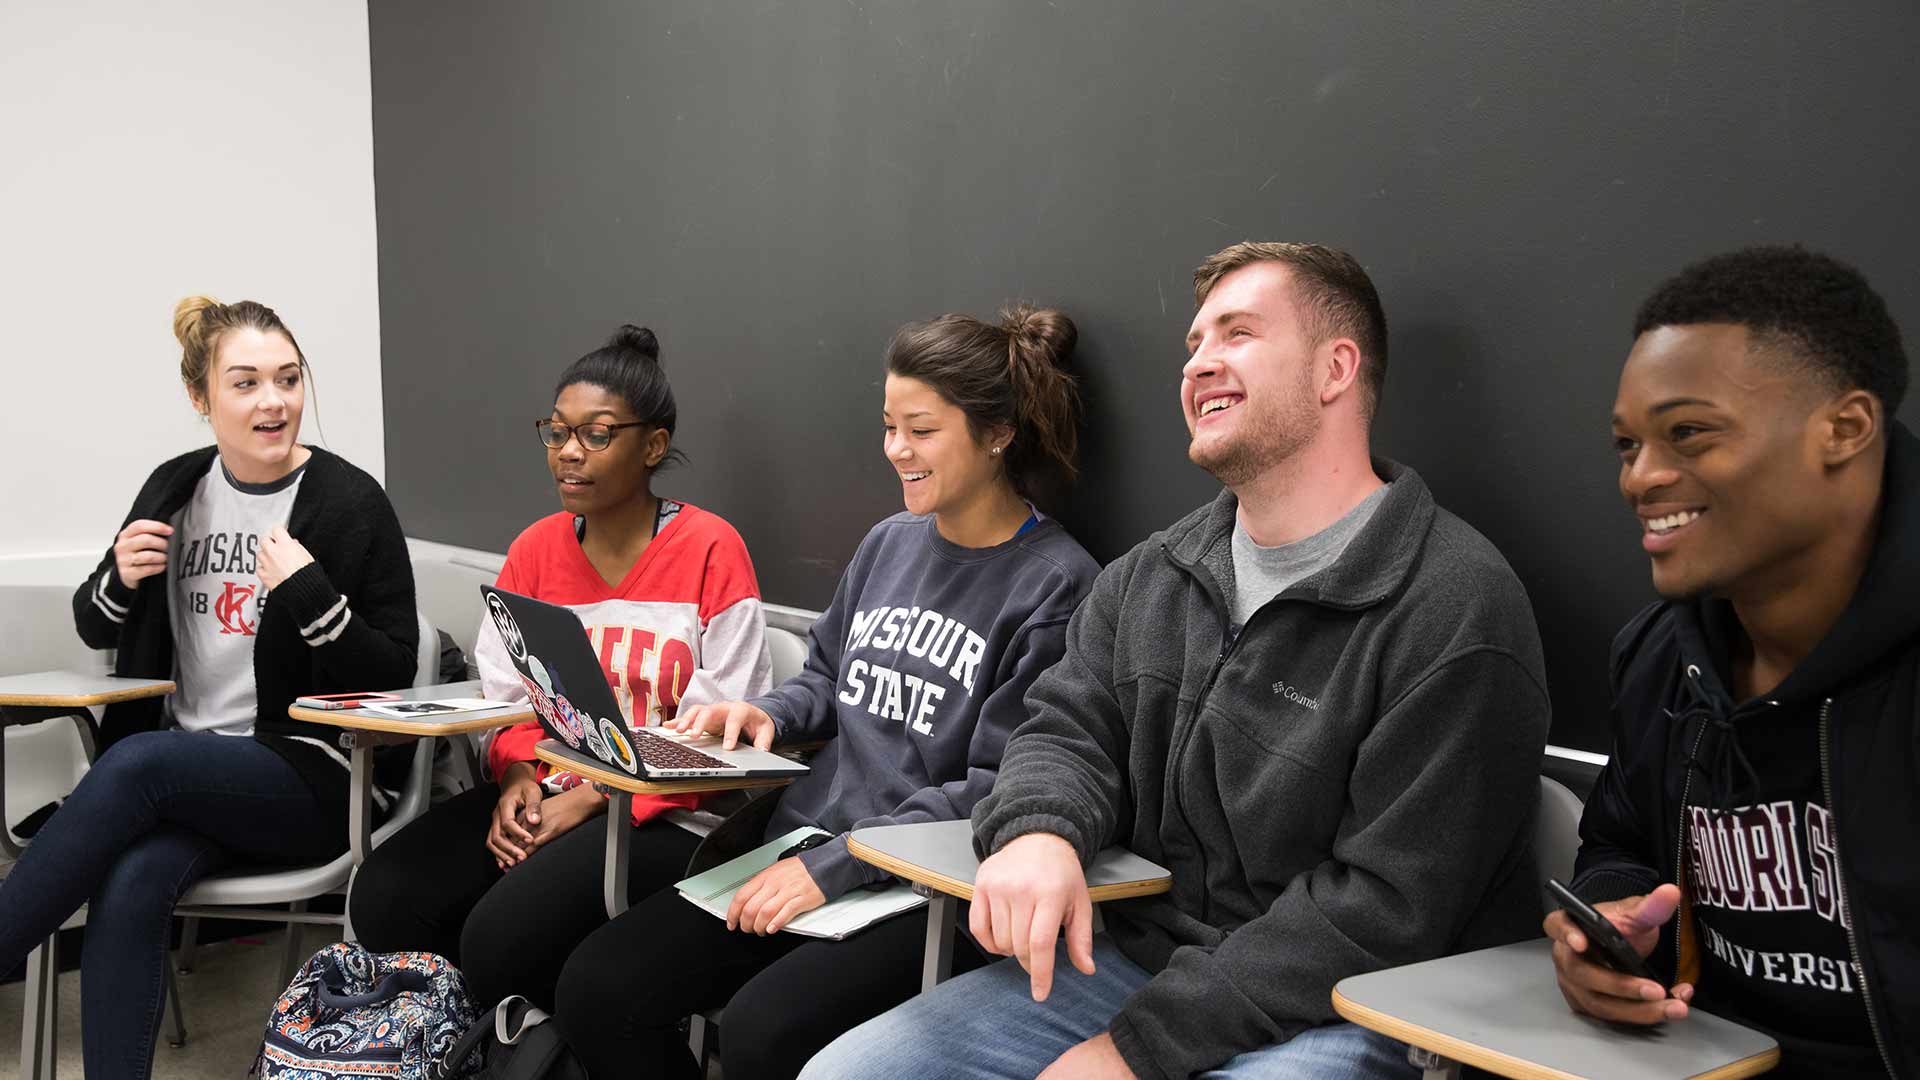 A group of students share a laugh during class.